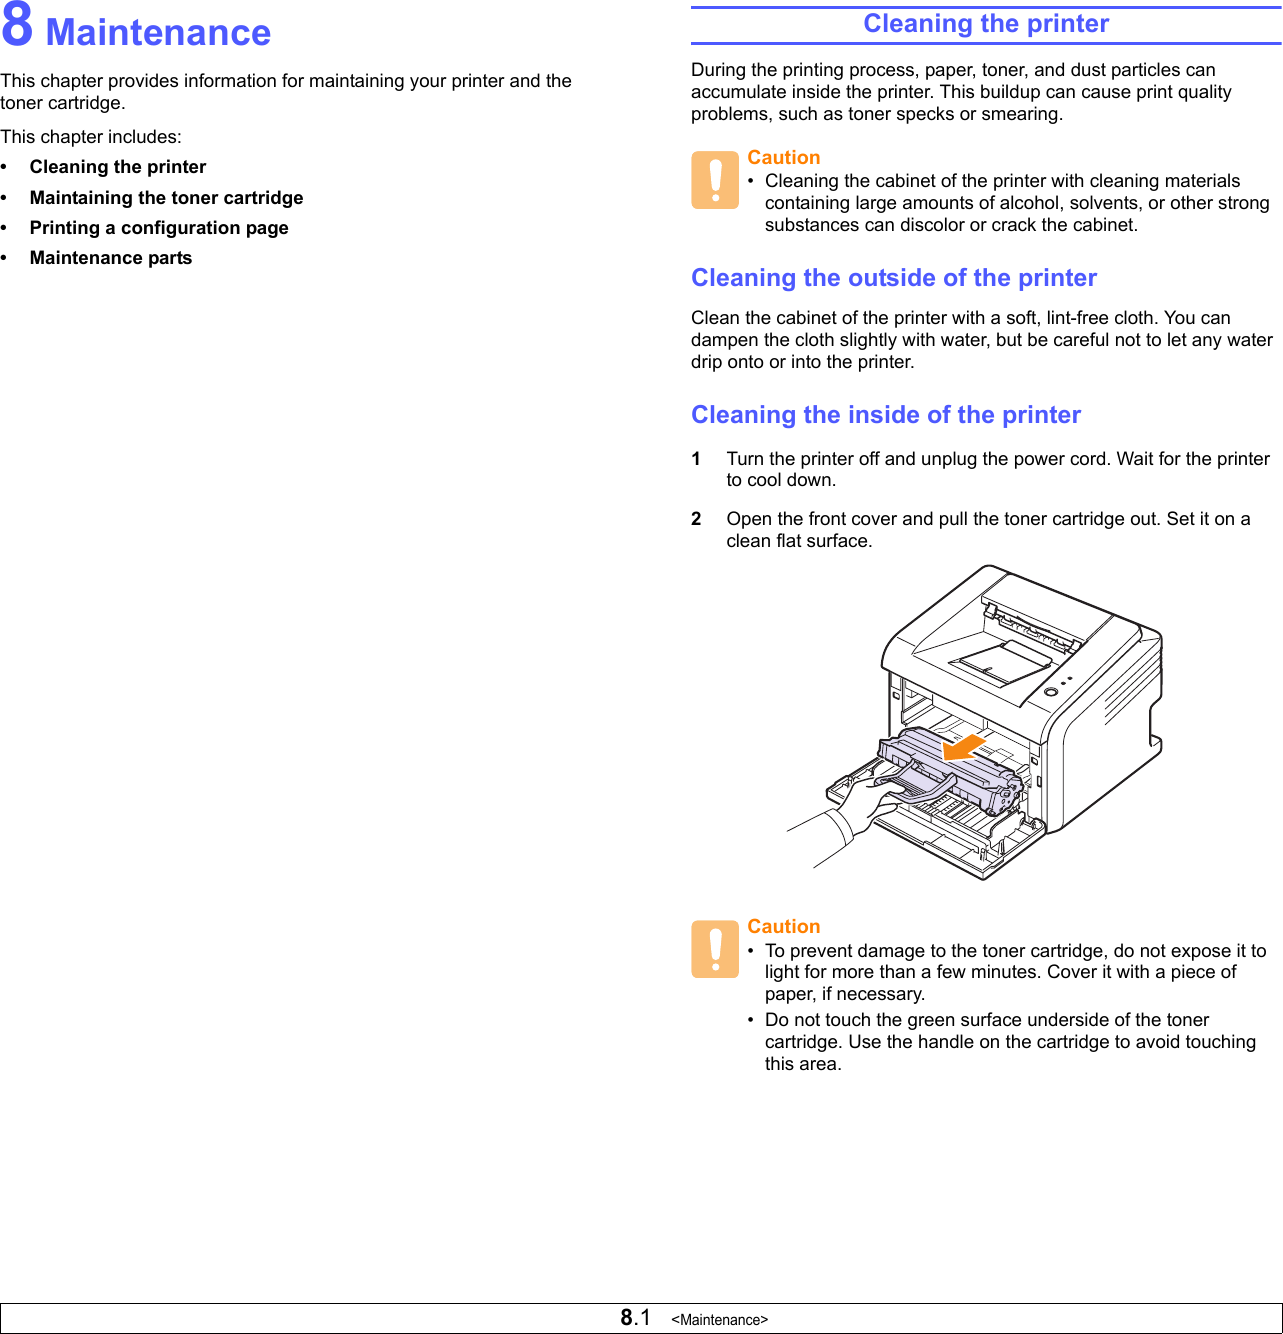 8.1   &lt;Maintenance&gt;8 MaintenanceThis chapter provides information for maintaining your printer and the toner cartridge.This chapter includes:• Cleaning the printer• Maintaining the toner cartridge• Printing a configuration page• Maintenance partsCleaning the printerDuring the printing process, paper, toner, and dust particles can accumulate inside the printer. This buildup can cause print quality problems, such as toner specks or smearing. Cleaning the outside of the printerClean the cabinet of the printer with a soft, lint-free cloth. You can dampen the cloth slightly with water, but be careful not to let any water drip onto or into the printer.Cleaning the inside of the printer1Turn the printer off and unplug the power cord. Wait for the printer to cool down.2Open the front cover and pull the toner cartridge out. Set it on a clean flat surface.Caution• Cleaning the cabinet of the printer with cleaning materials containing large amounts of alcohol, solvents, or other strong substances can discolor or crack the cabinet.Caution• To prevent damage to the toner cartridge, do not expose it to light for more than a few minutes. Cover it with a piece of paper, if necessary. • Do not touch the green surface underside of the toner cartridge. Use the handle on the cartridge to avoid touching this area.